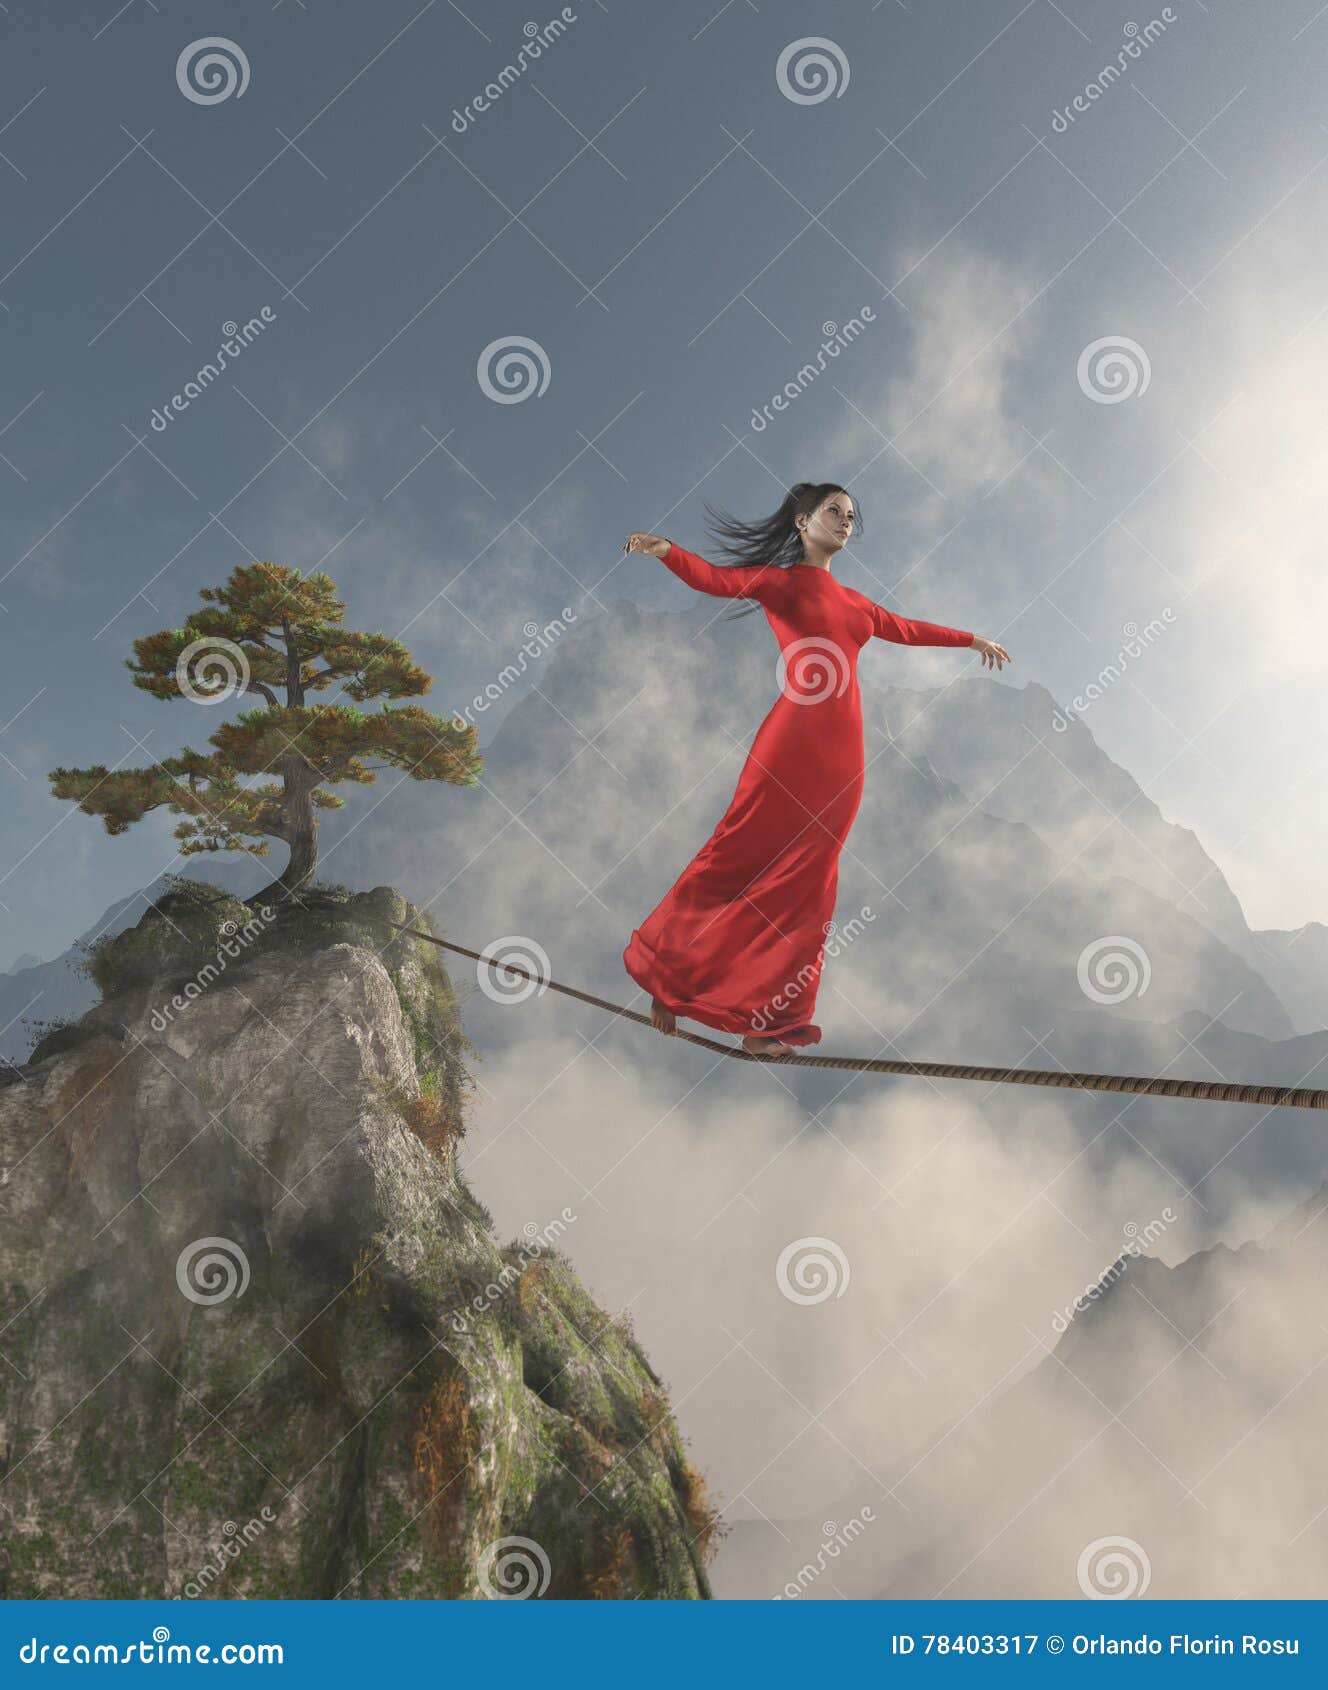 Young Girl Walking in Balance on the Rope Stock Image - Image of composit,  dangerous: 78403317